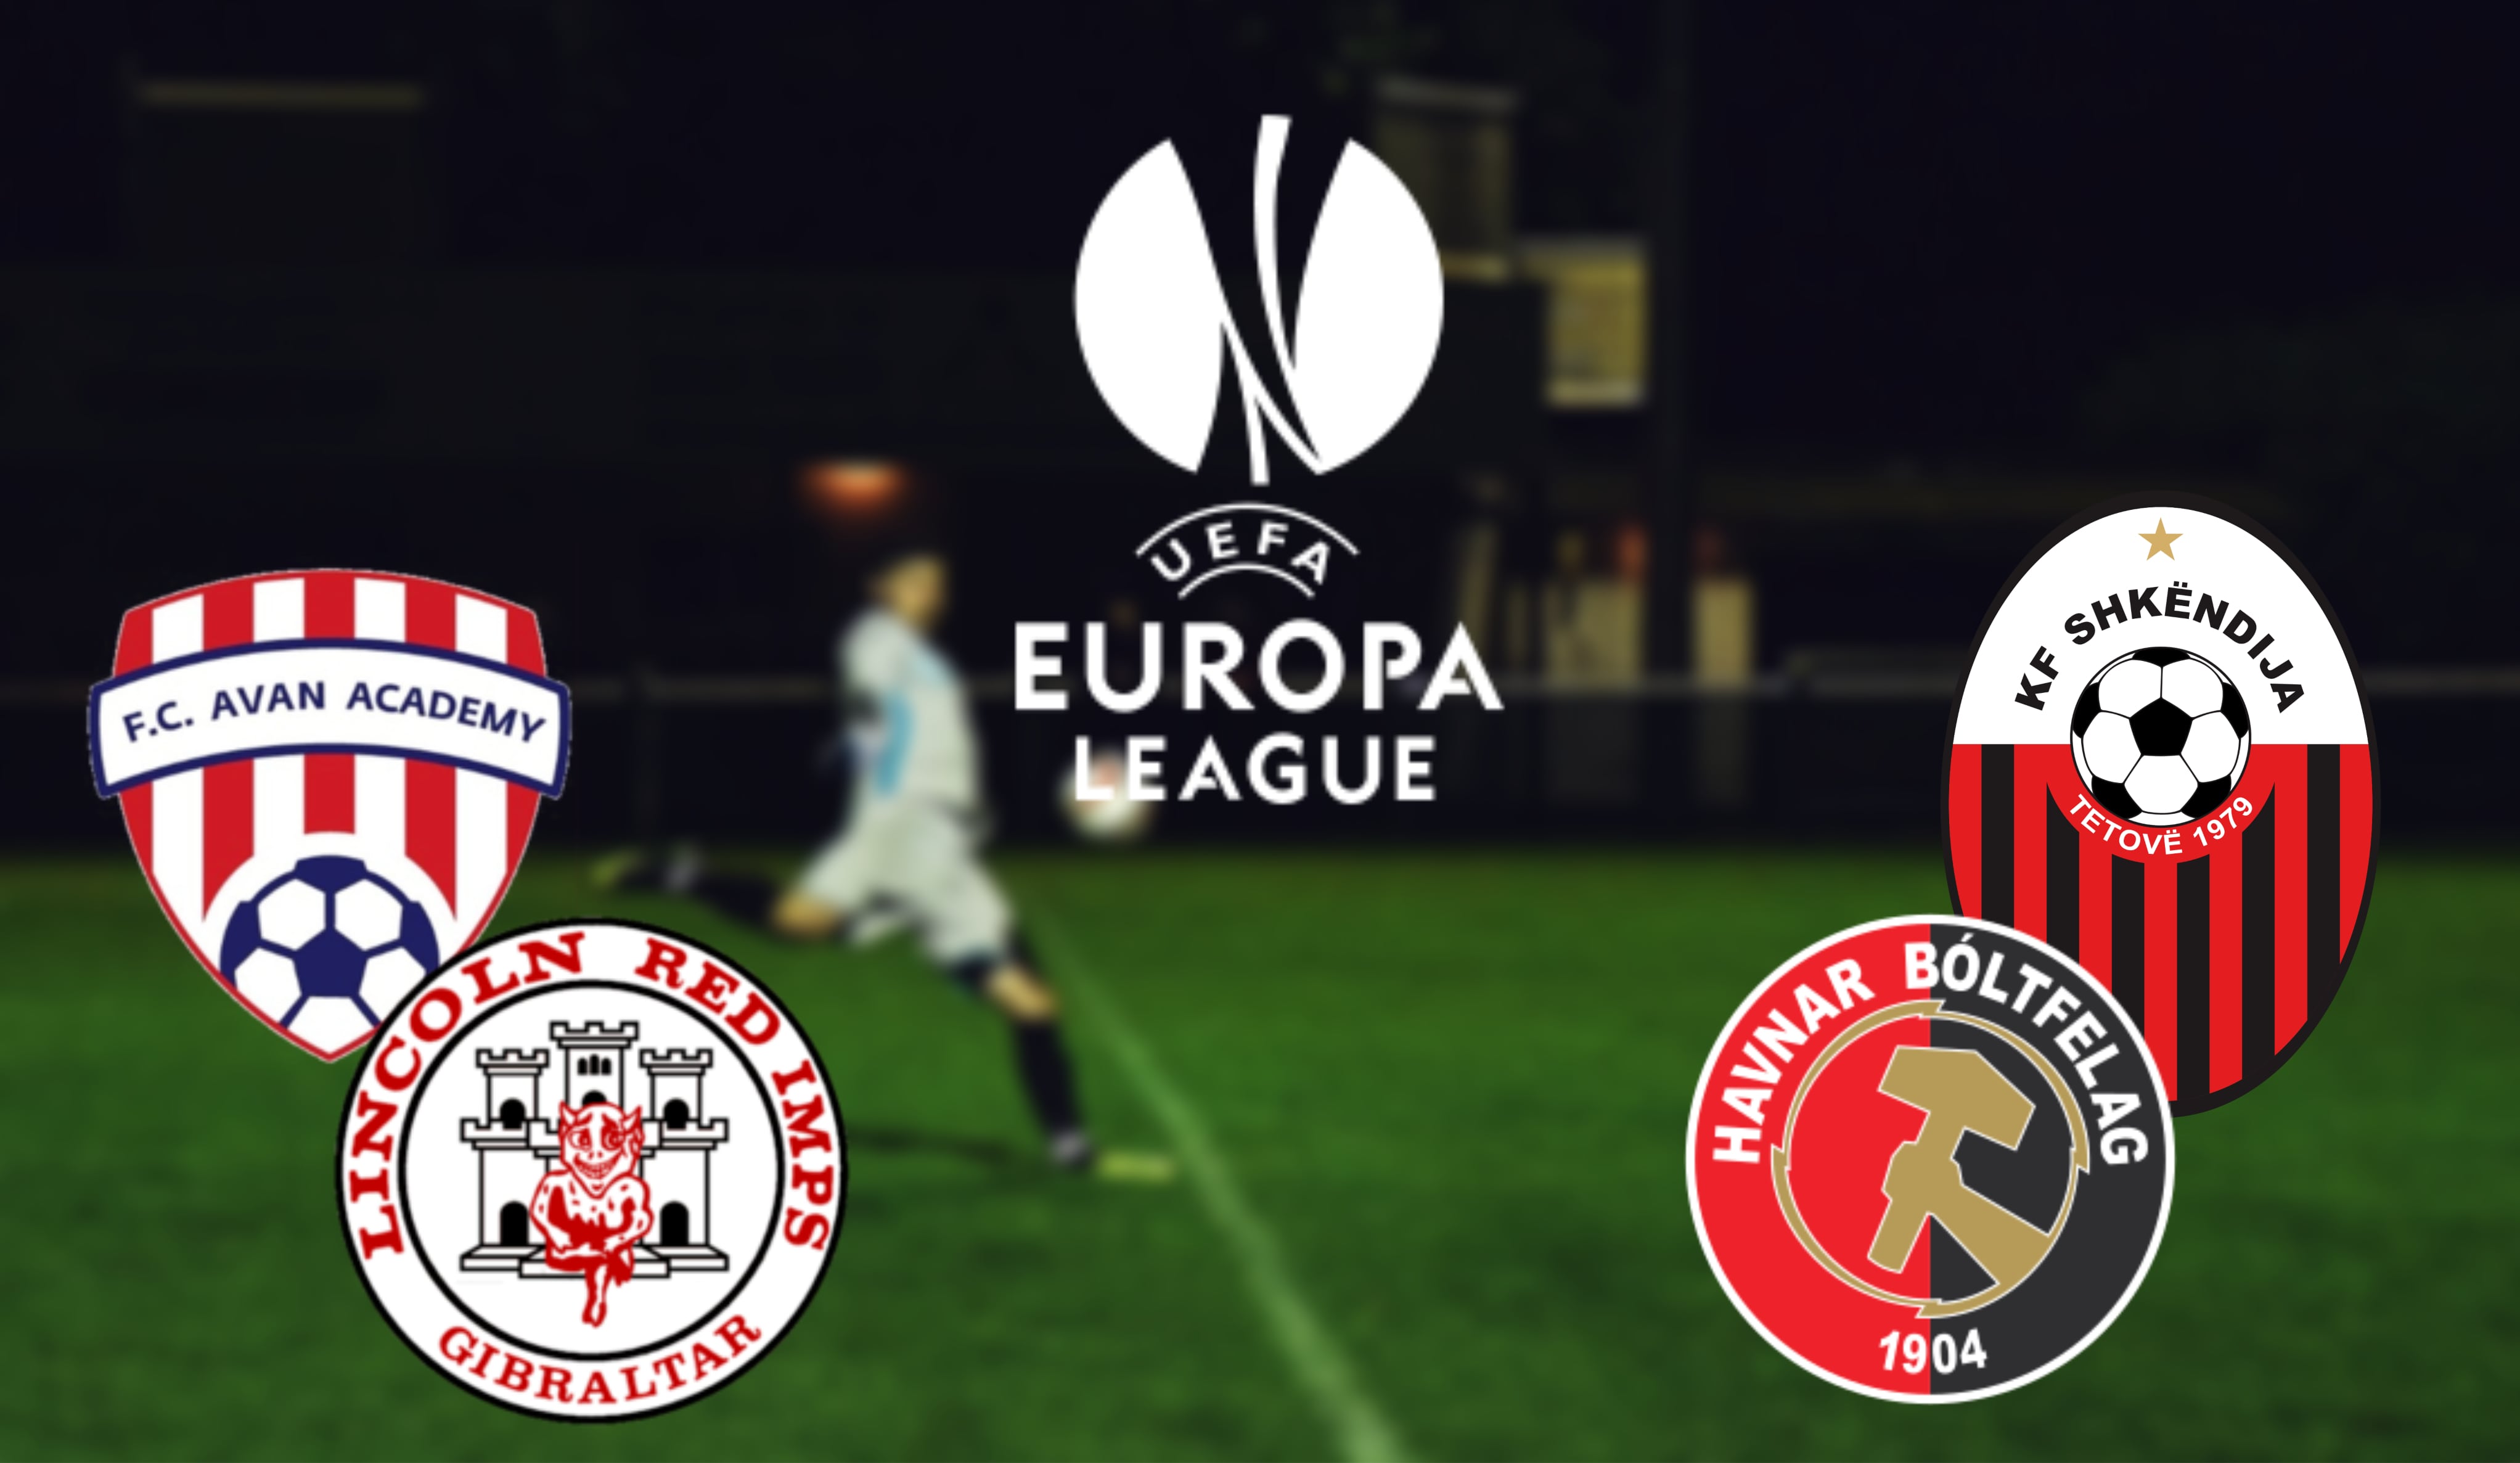 Europa League Second Qualifying Round – 24.07.19 Match Recaps